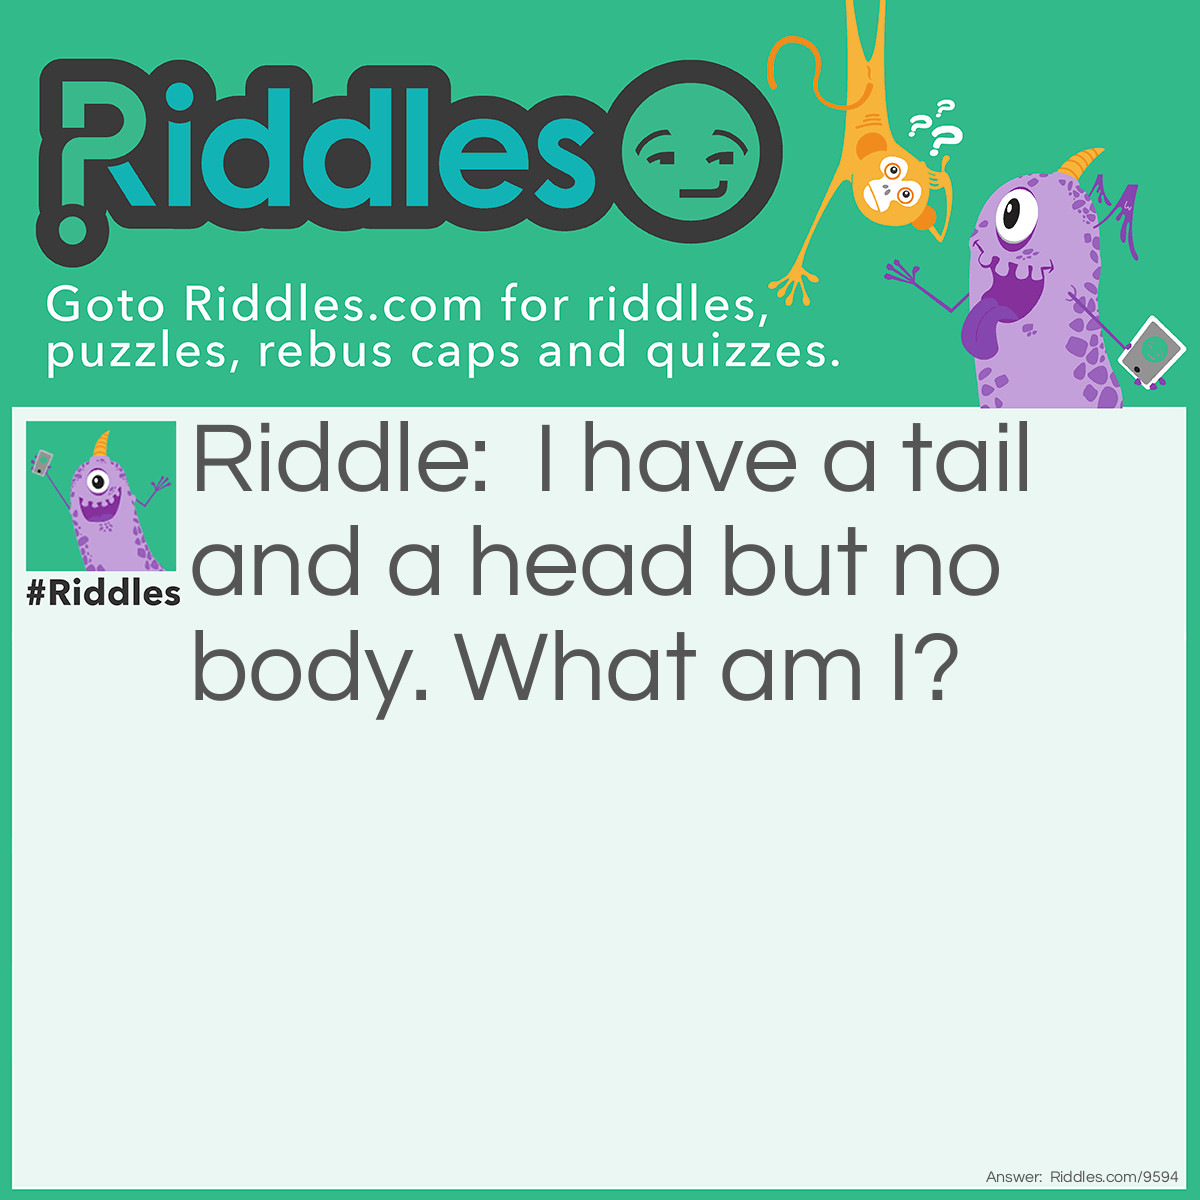 Riddle: I have a tail and a head but no body. What am I? Answer: A coin.